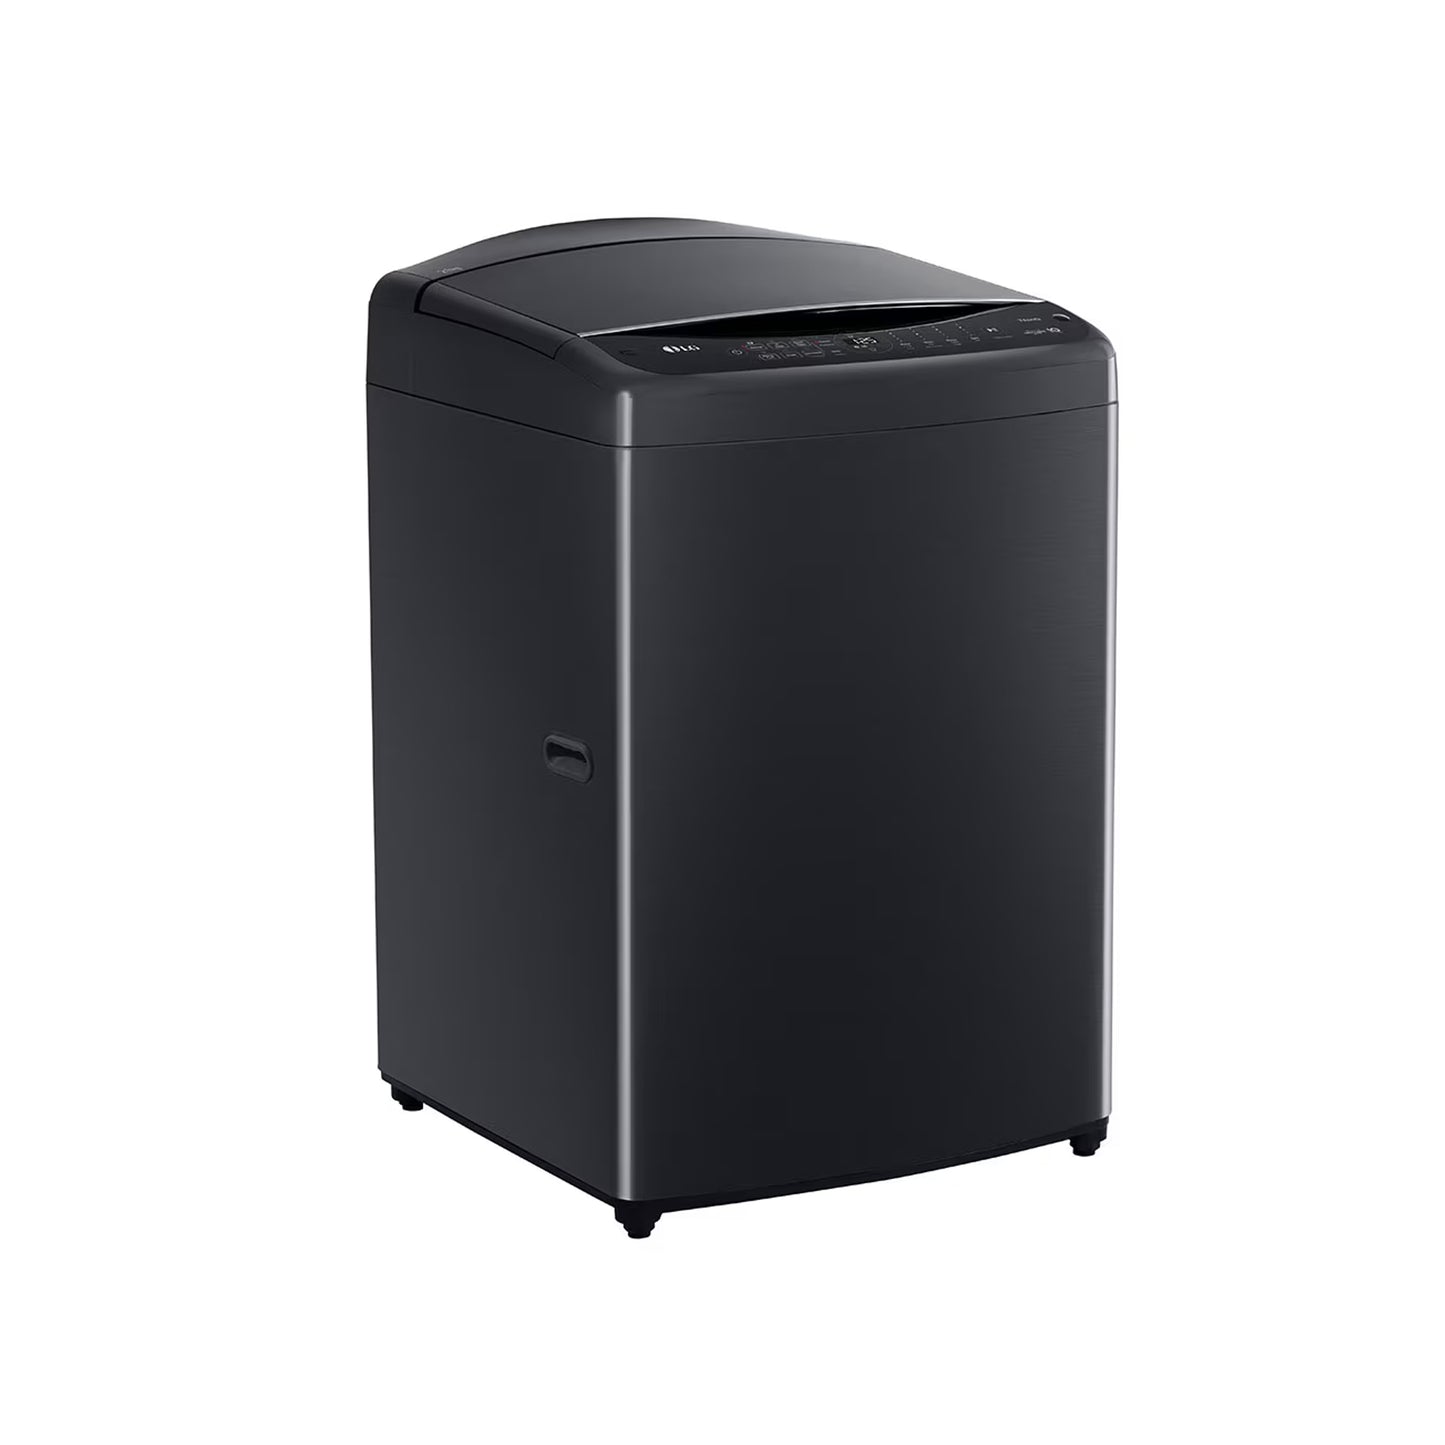 LG 21kg Top Load Washing Machine with AI DD In Black Finish